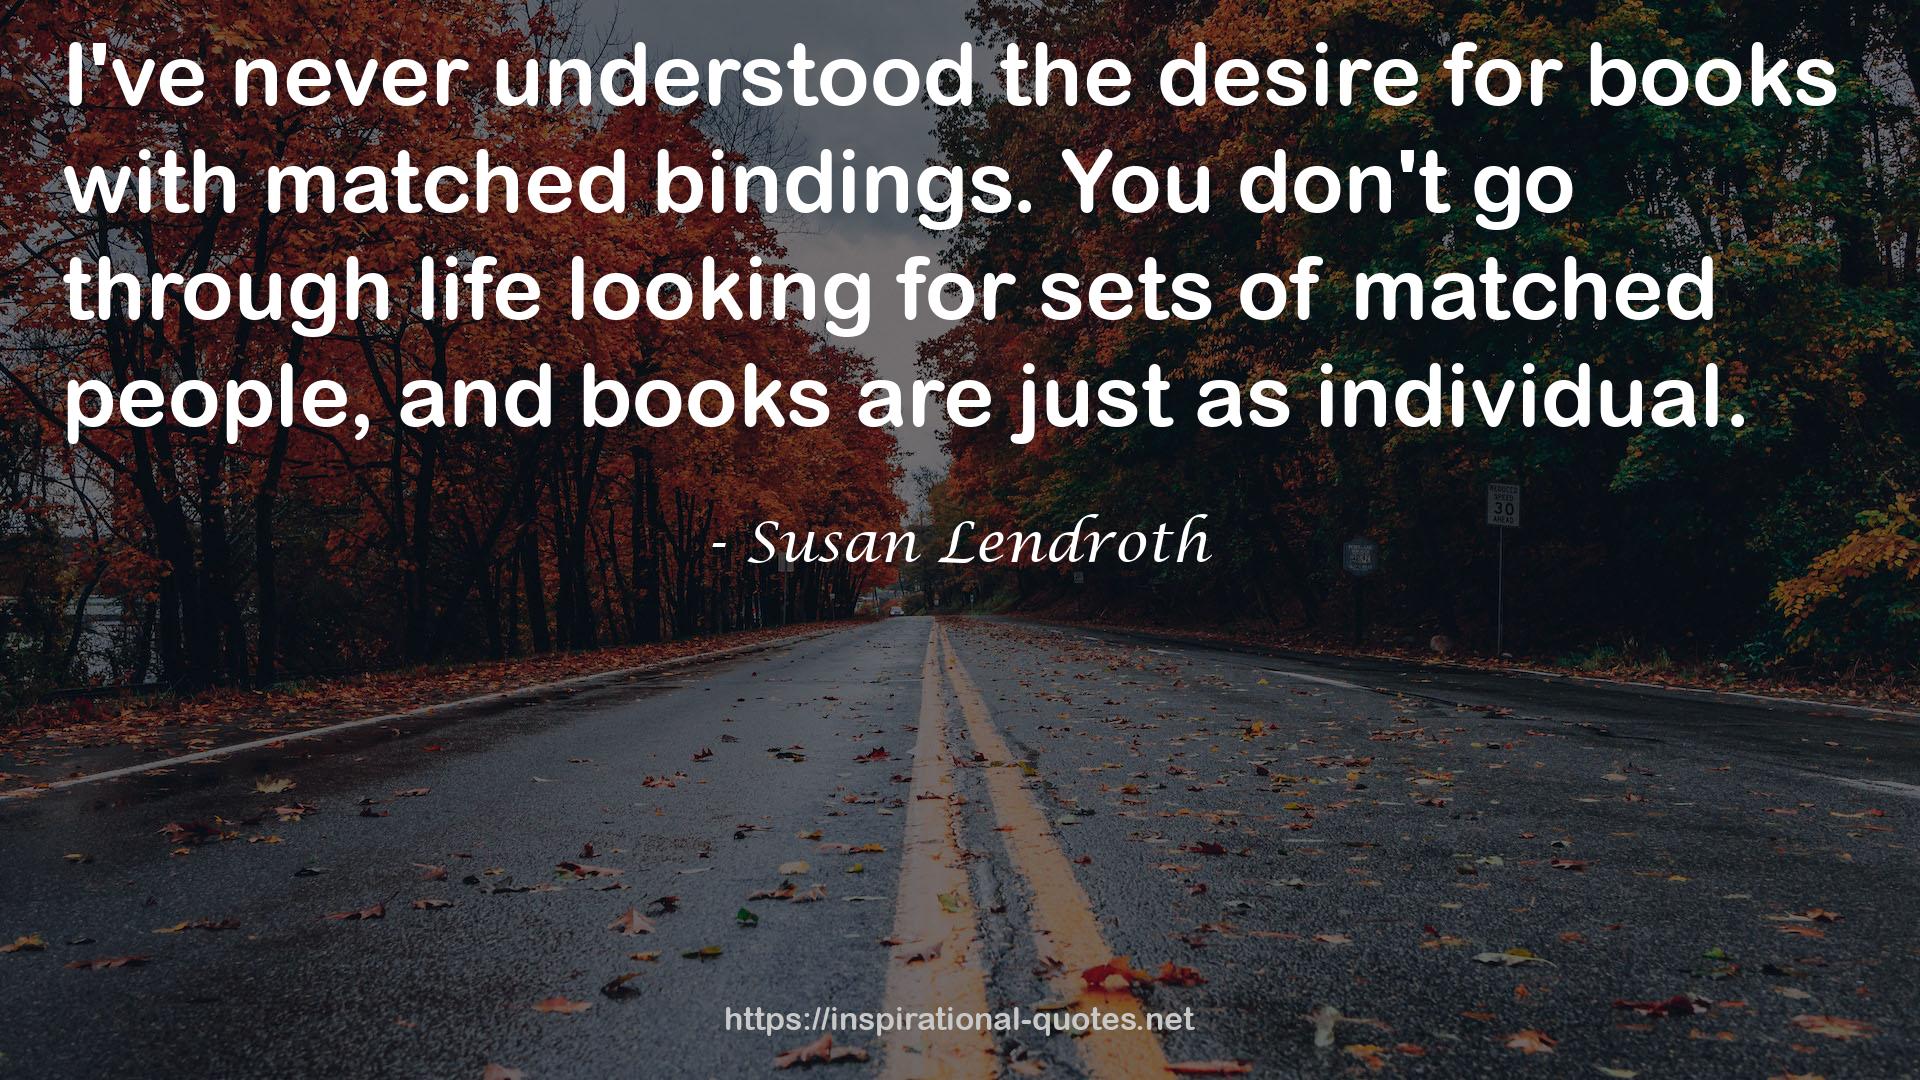 Susan Lendroth QUOTES